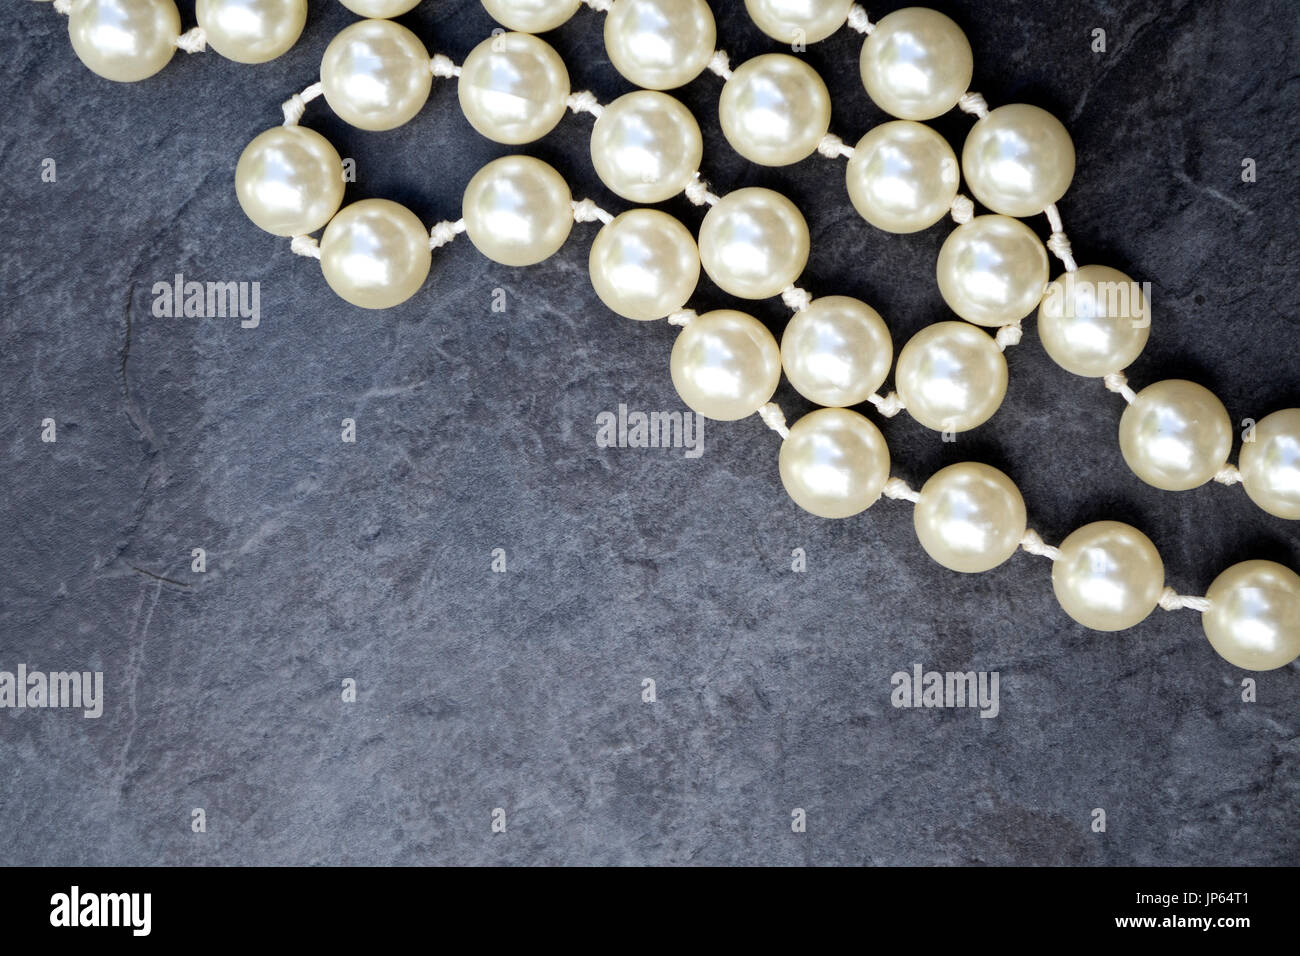 Fake Pearls on a grey background Stock Photo